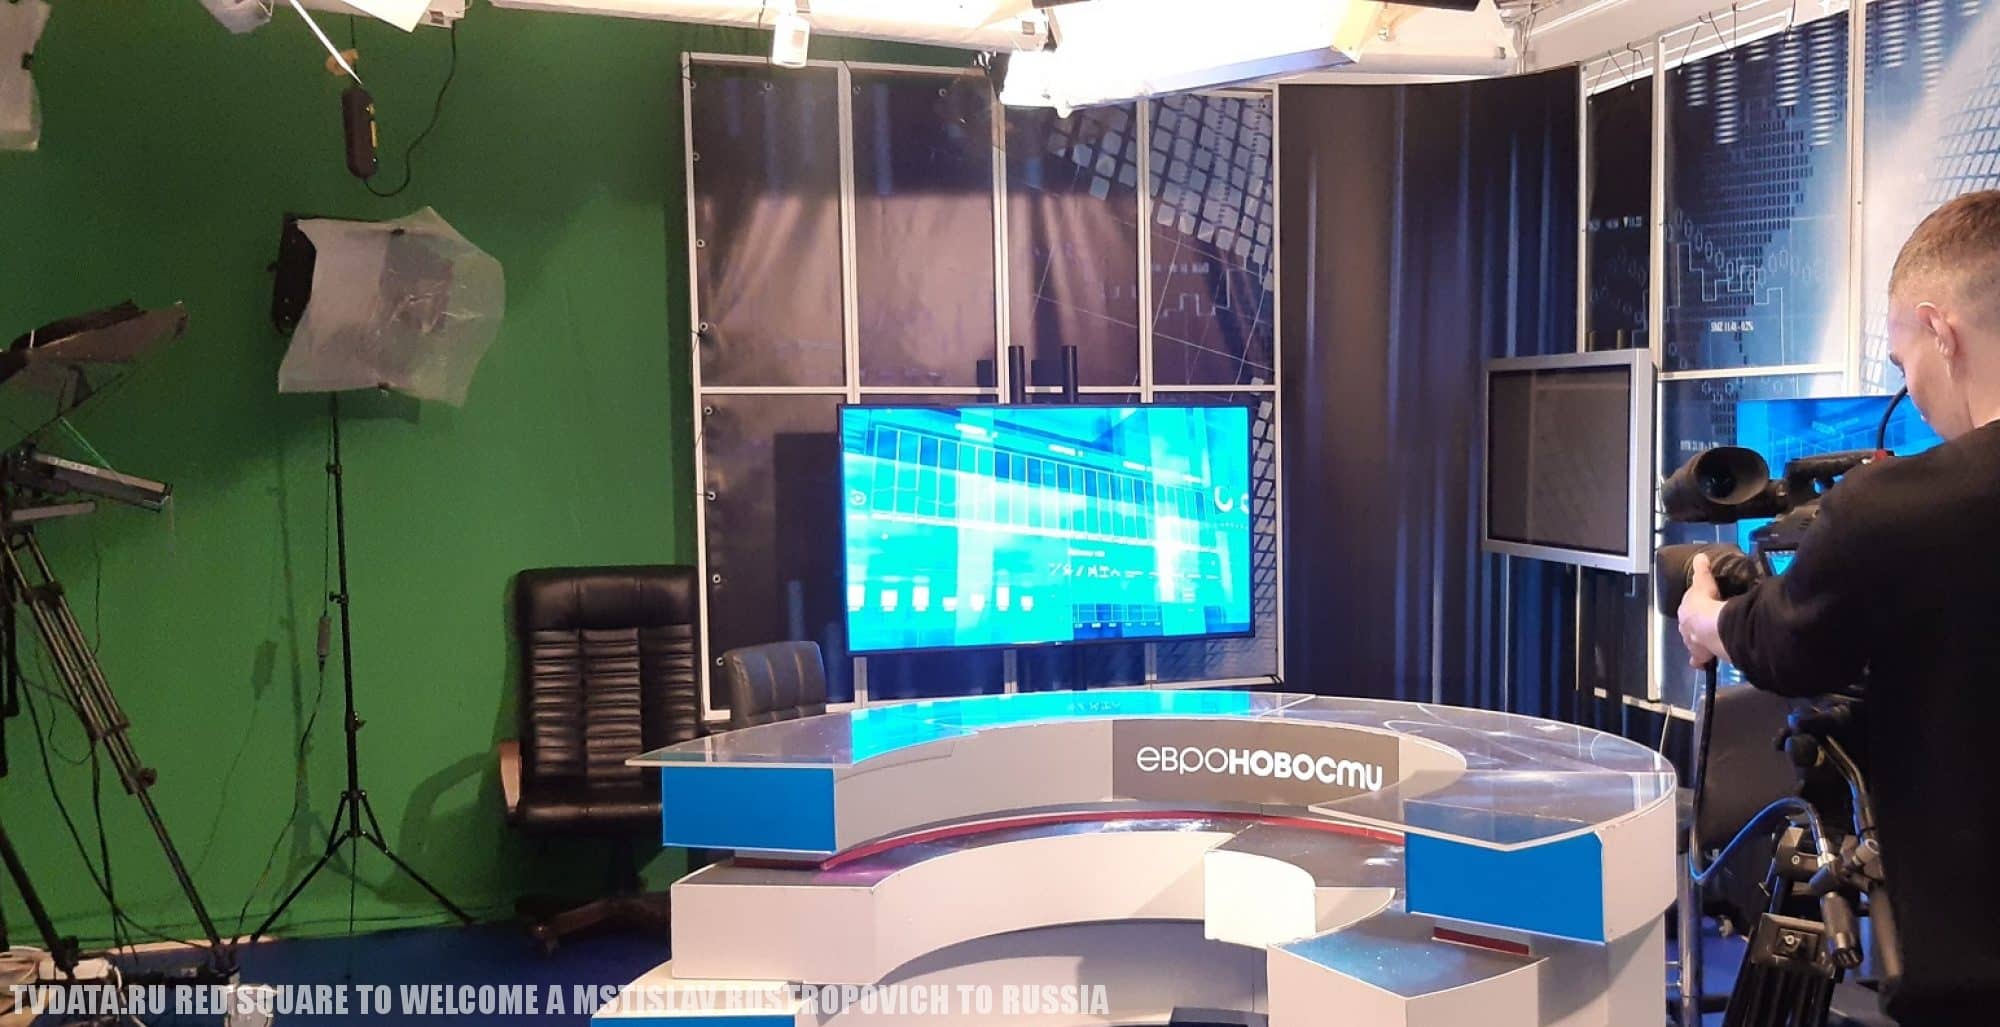 MEDIA in Russia, LIVE STREAMING STUDIO, Camera crew in Moscow